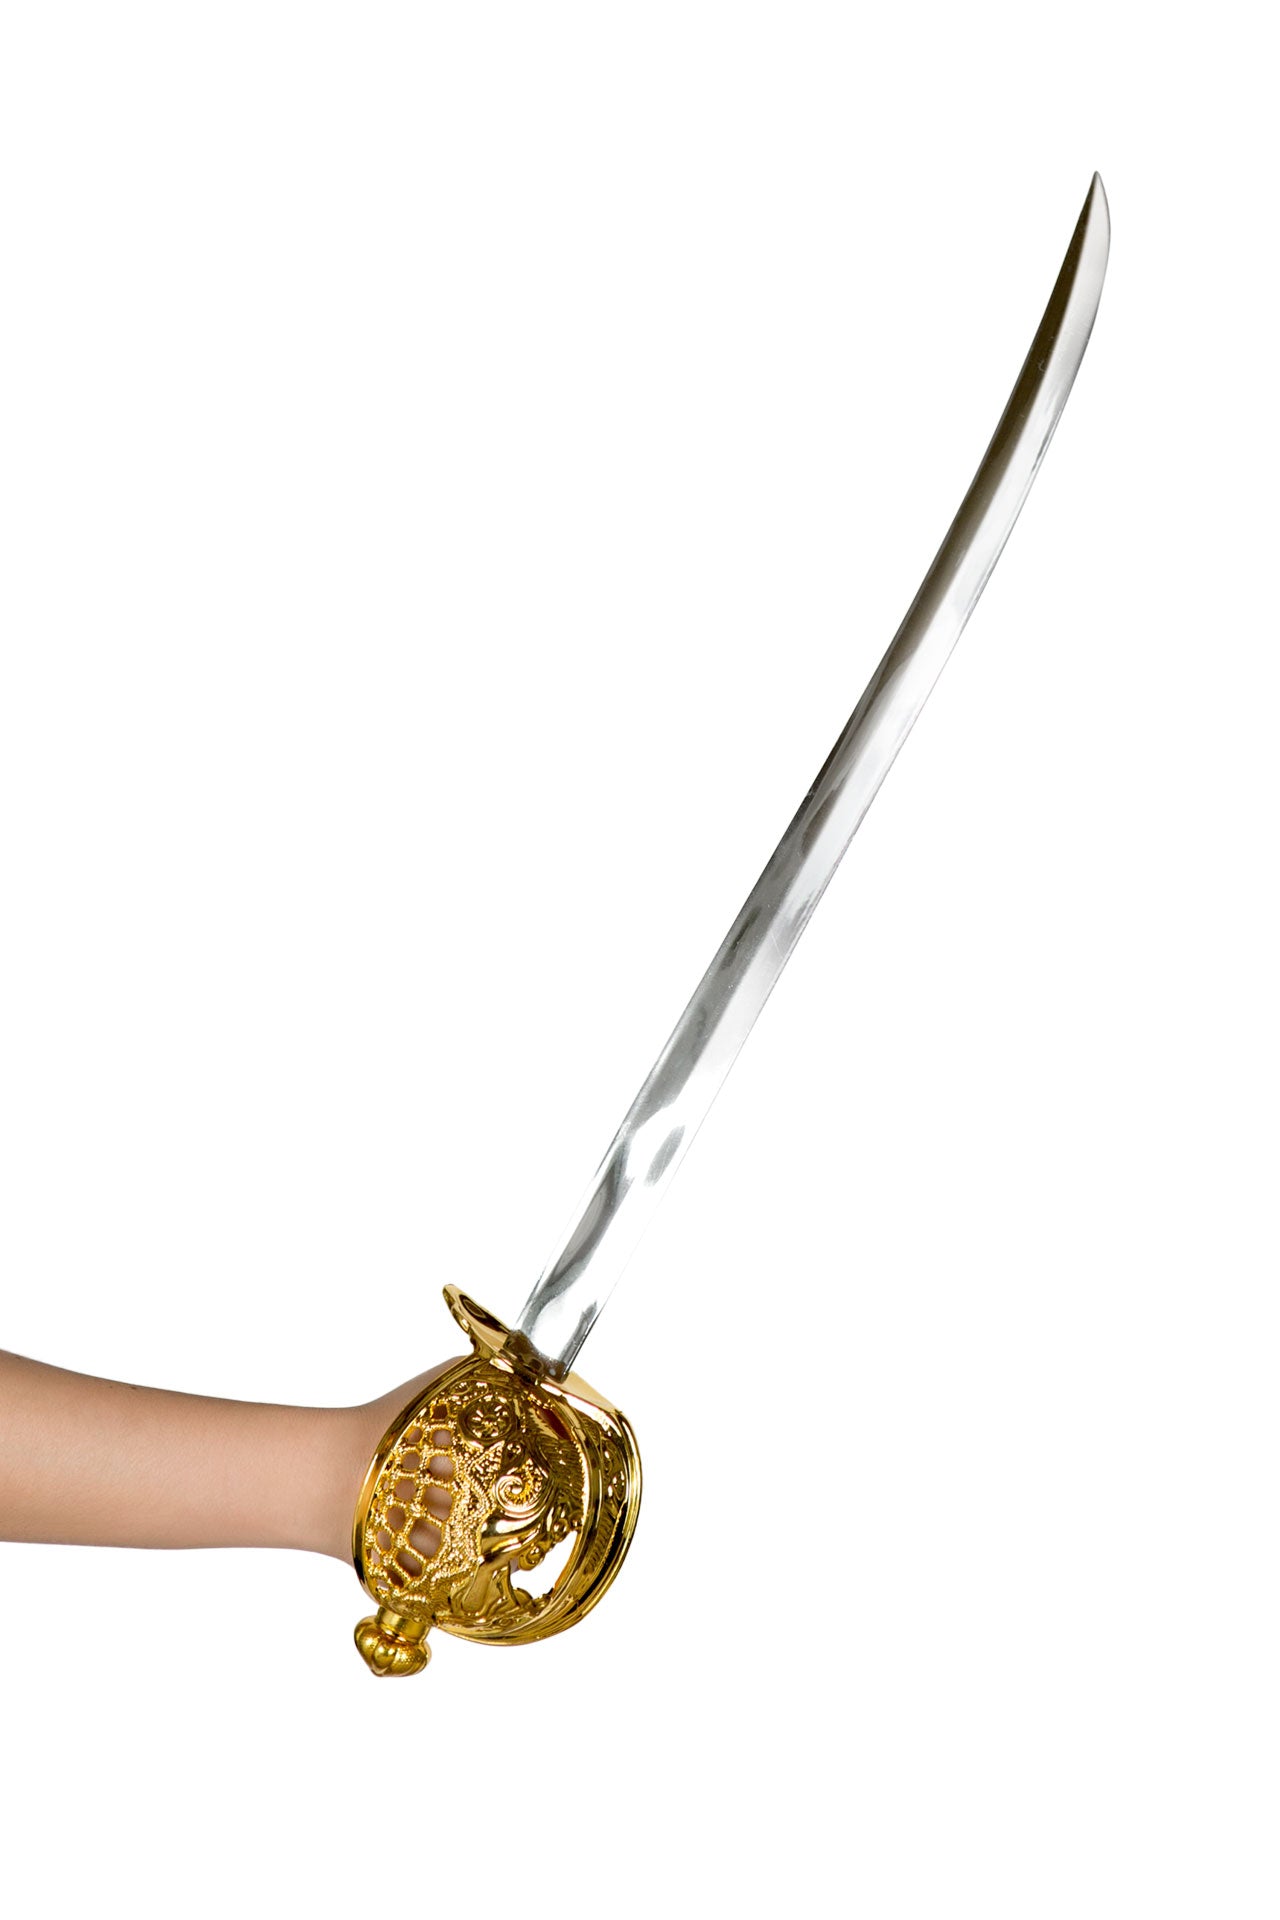 Roma Costume 25” Pirate Sword with Round Handle Silver/Gold